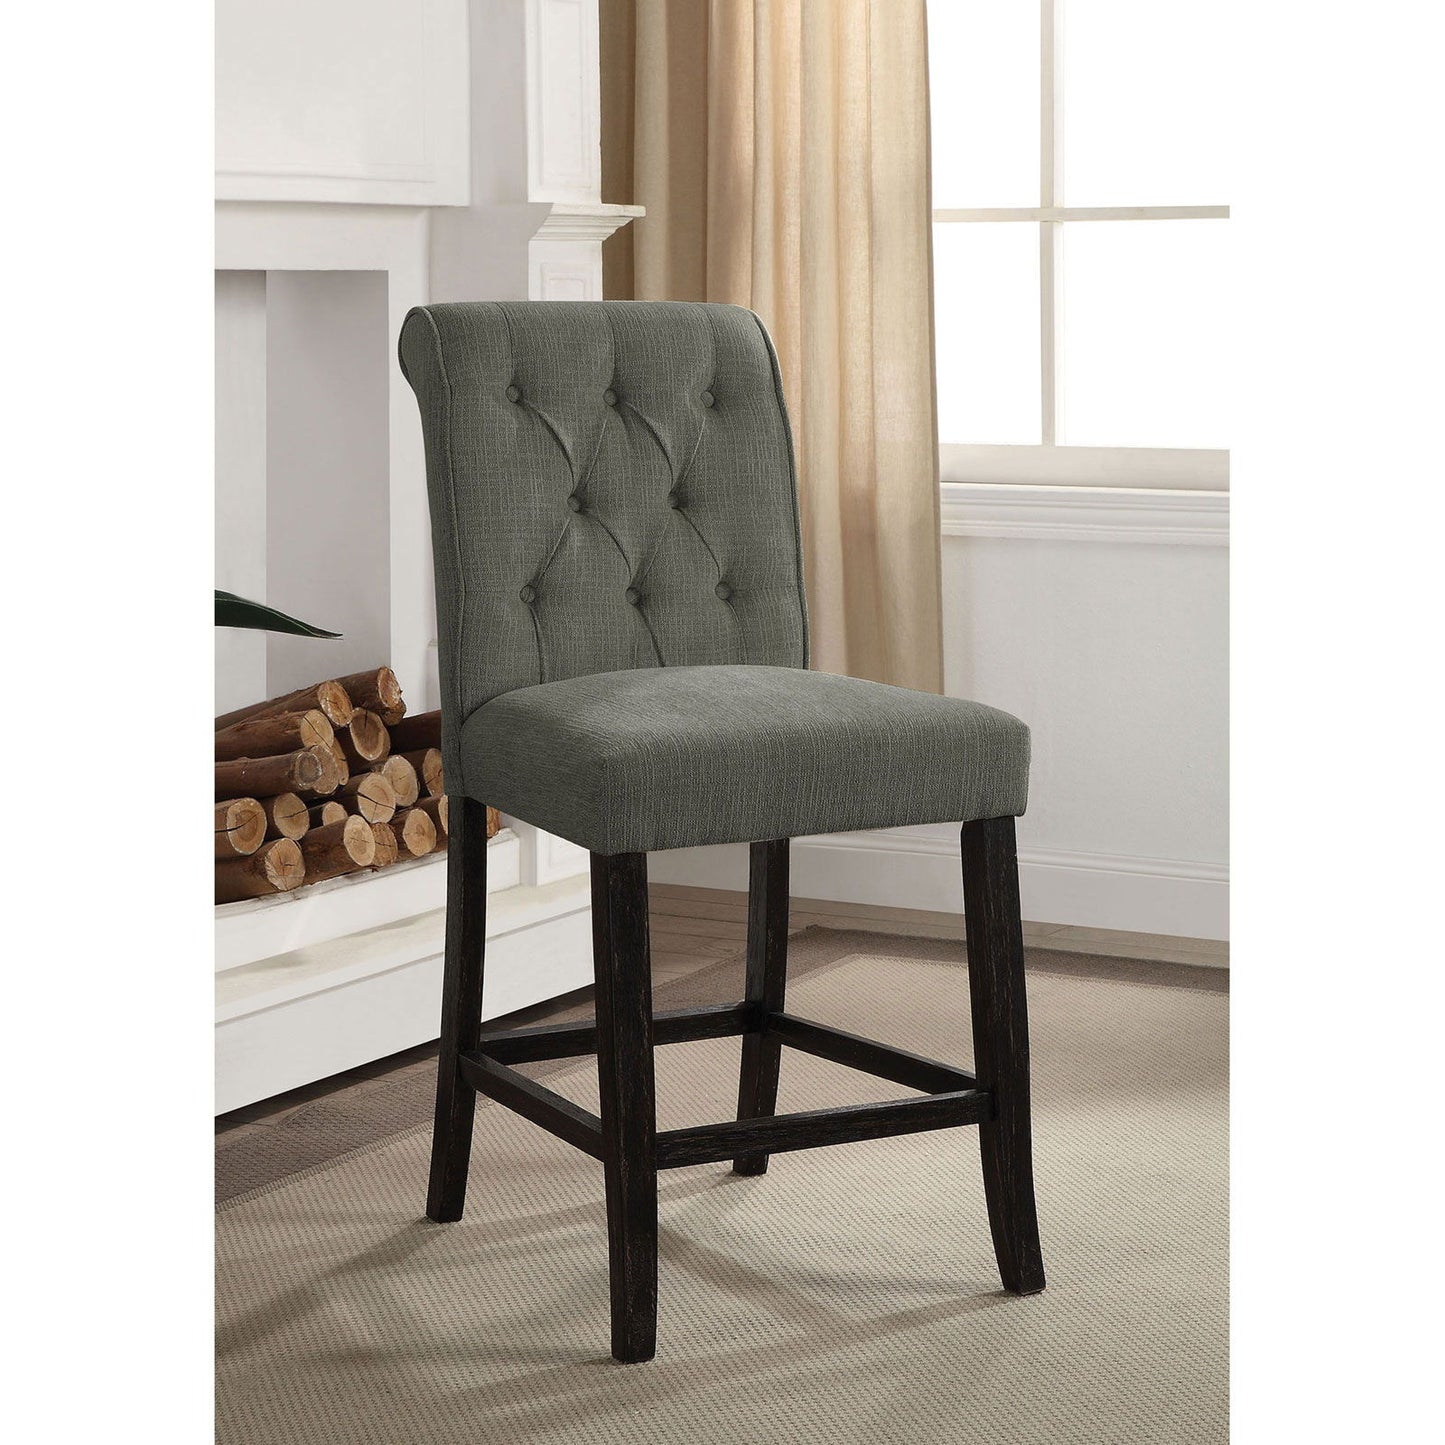 Izzy - Counter Height Chair (Set of 2)